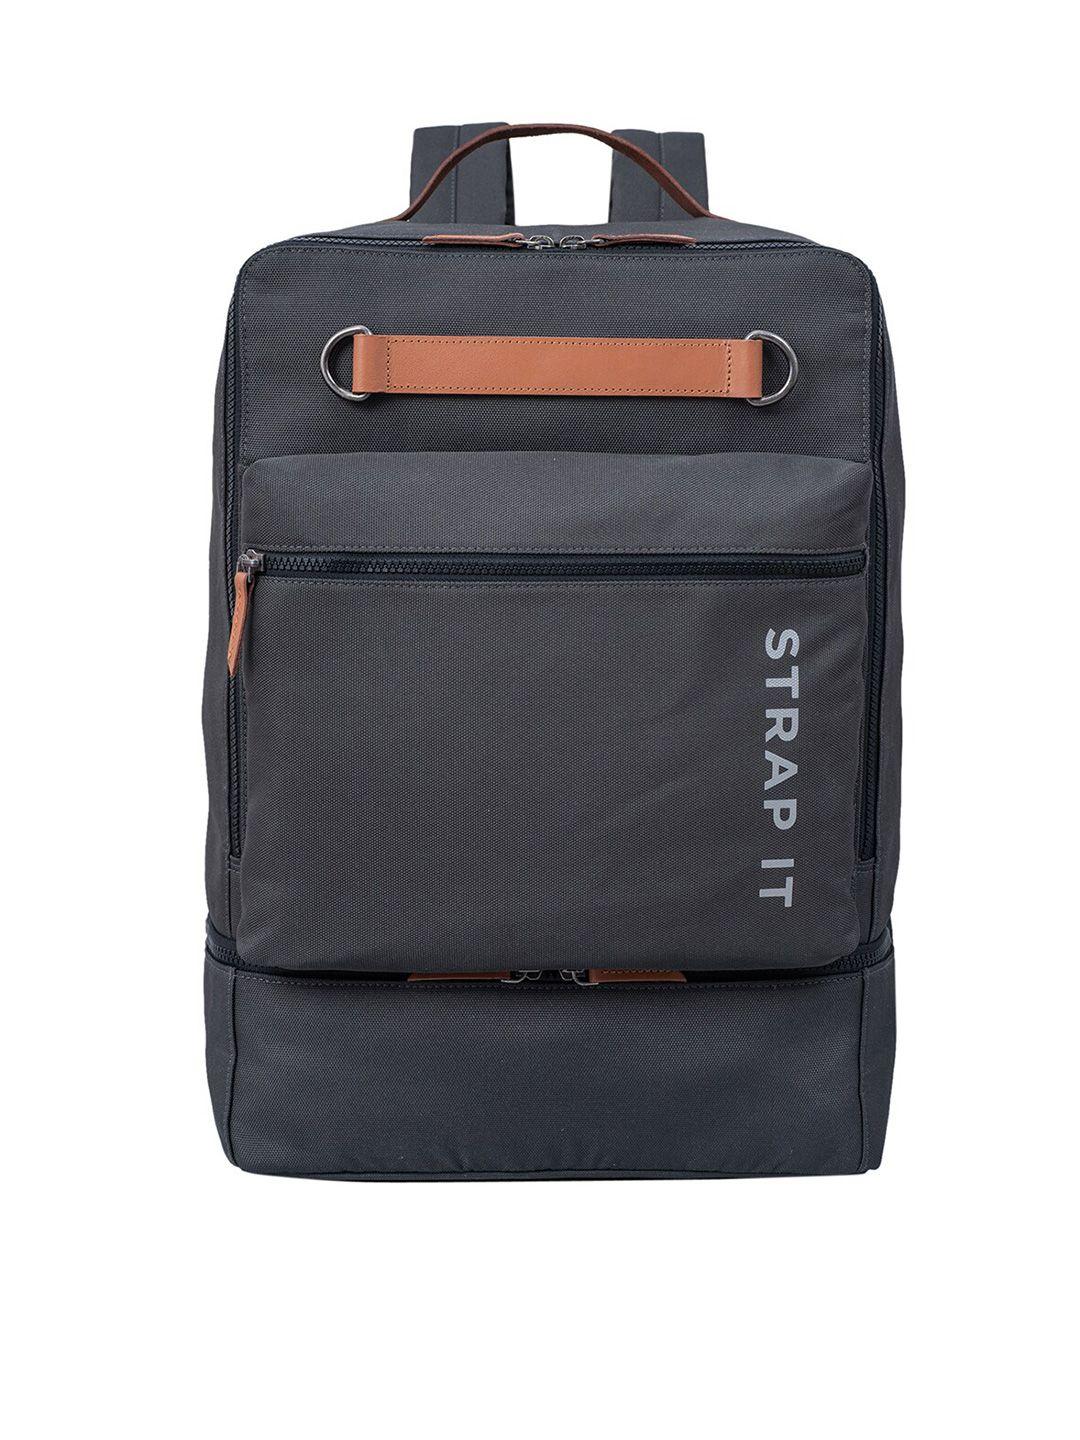 strap it unisex grey & brown travel laptop backpack with durabase technology